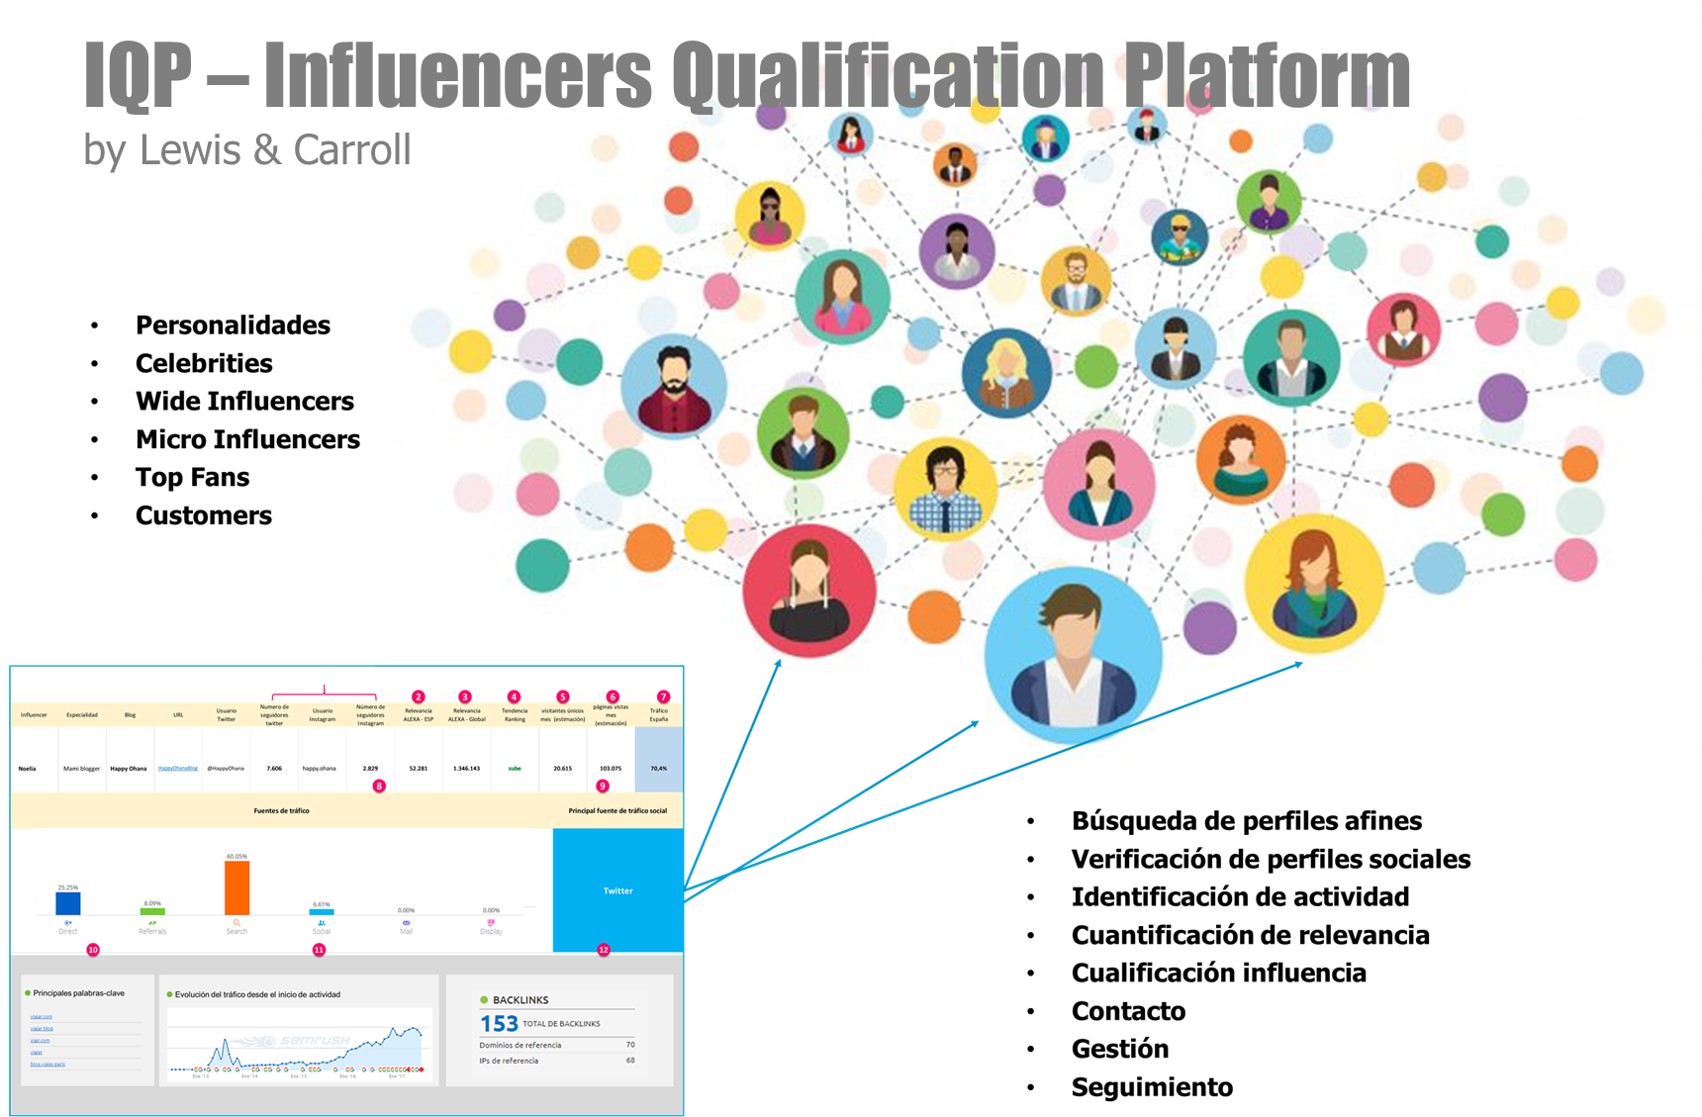 Influencers Qualification Platform by Lewis & Carroll